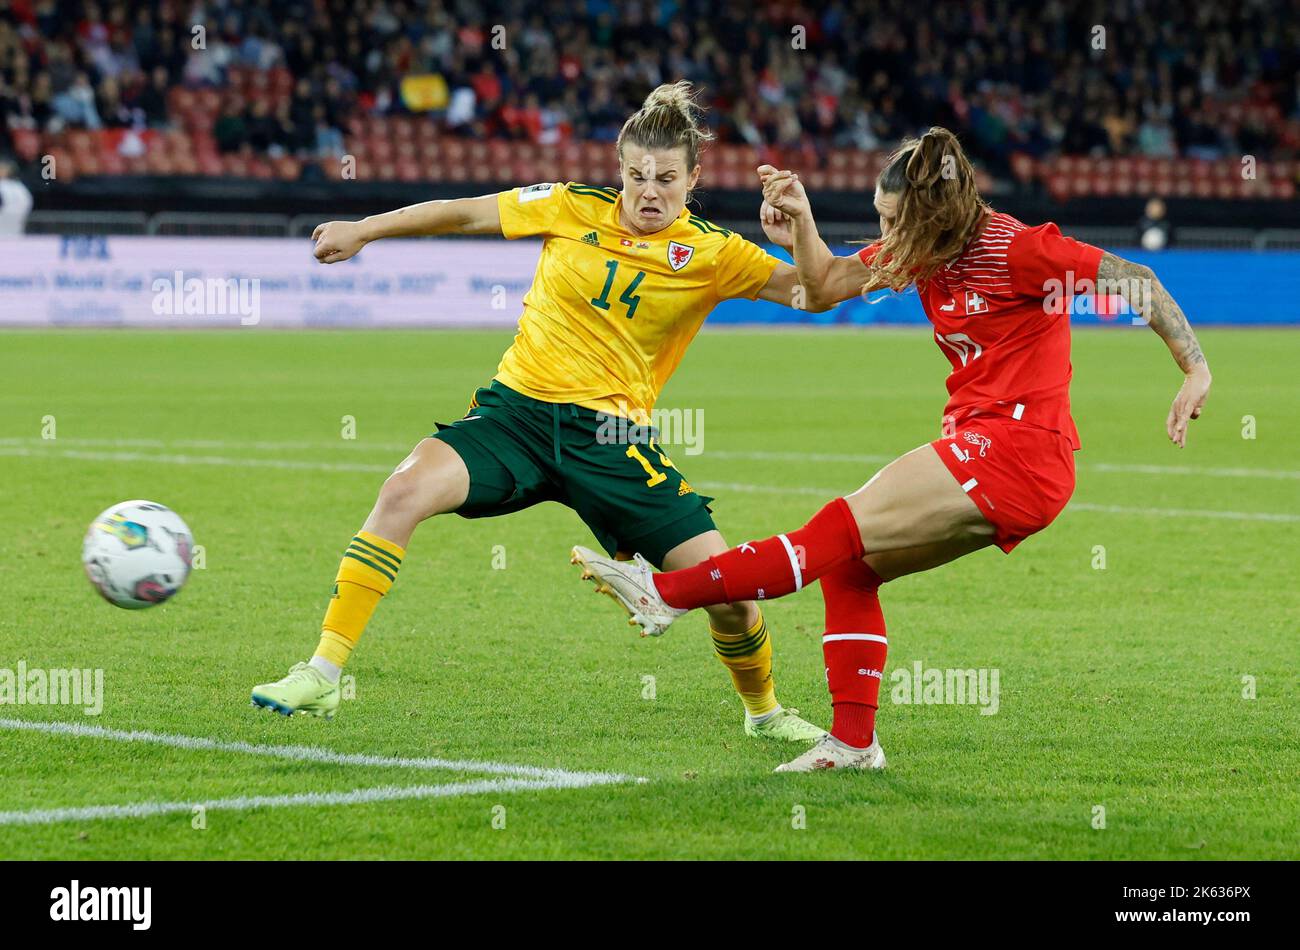 Soccer Football - FIFA Women's World Cup - UEFA Qualifiers - Switzerland v Wales - Stadion Letzigrund, Zurich, Switzerland - October 11, 2022 Switzerland's Ramona Bachmann scores their second goal REUTERS/Stefan Wermuth Stock Photo